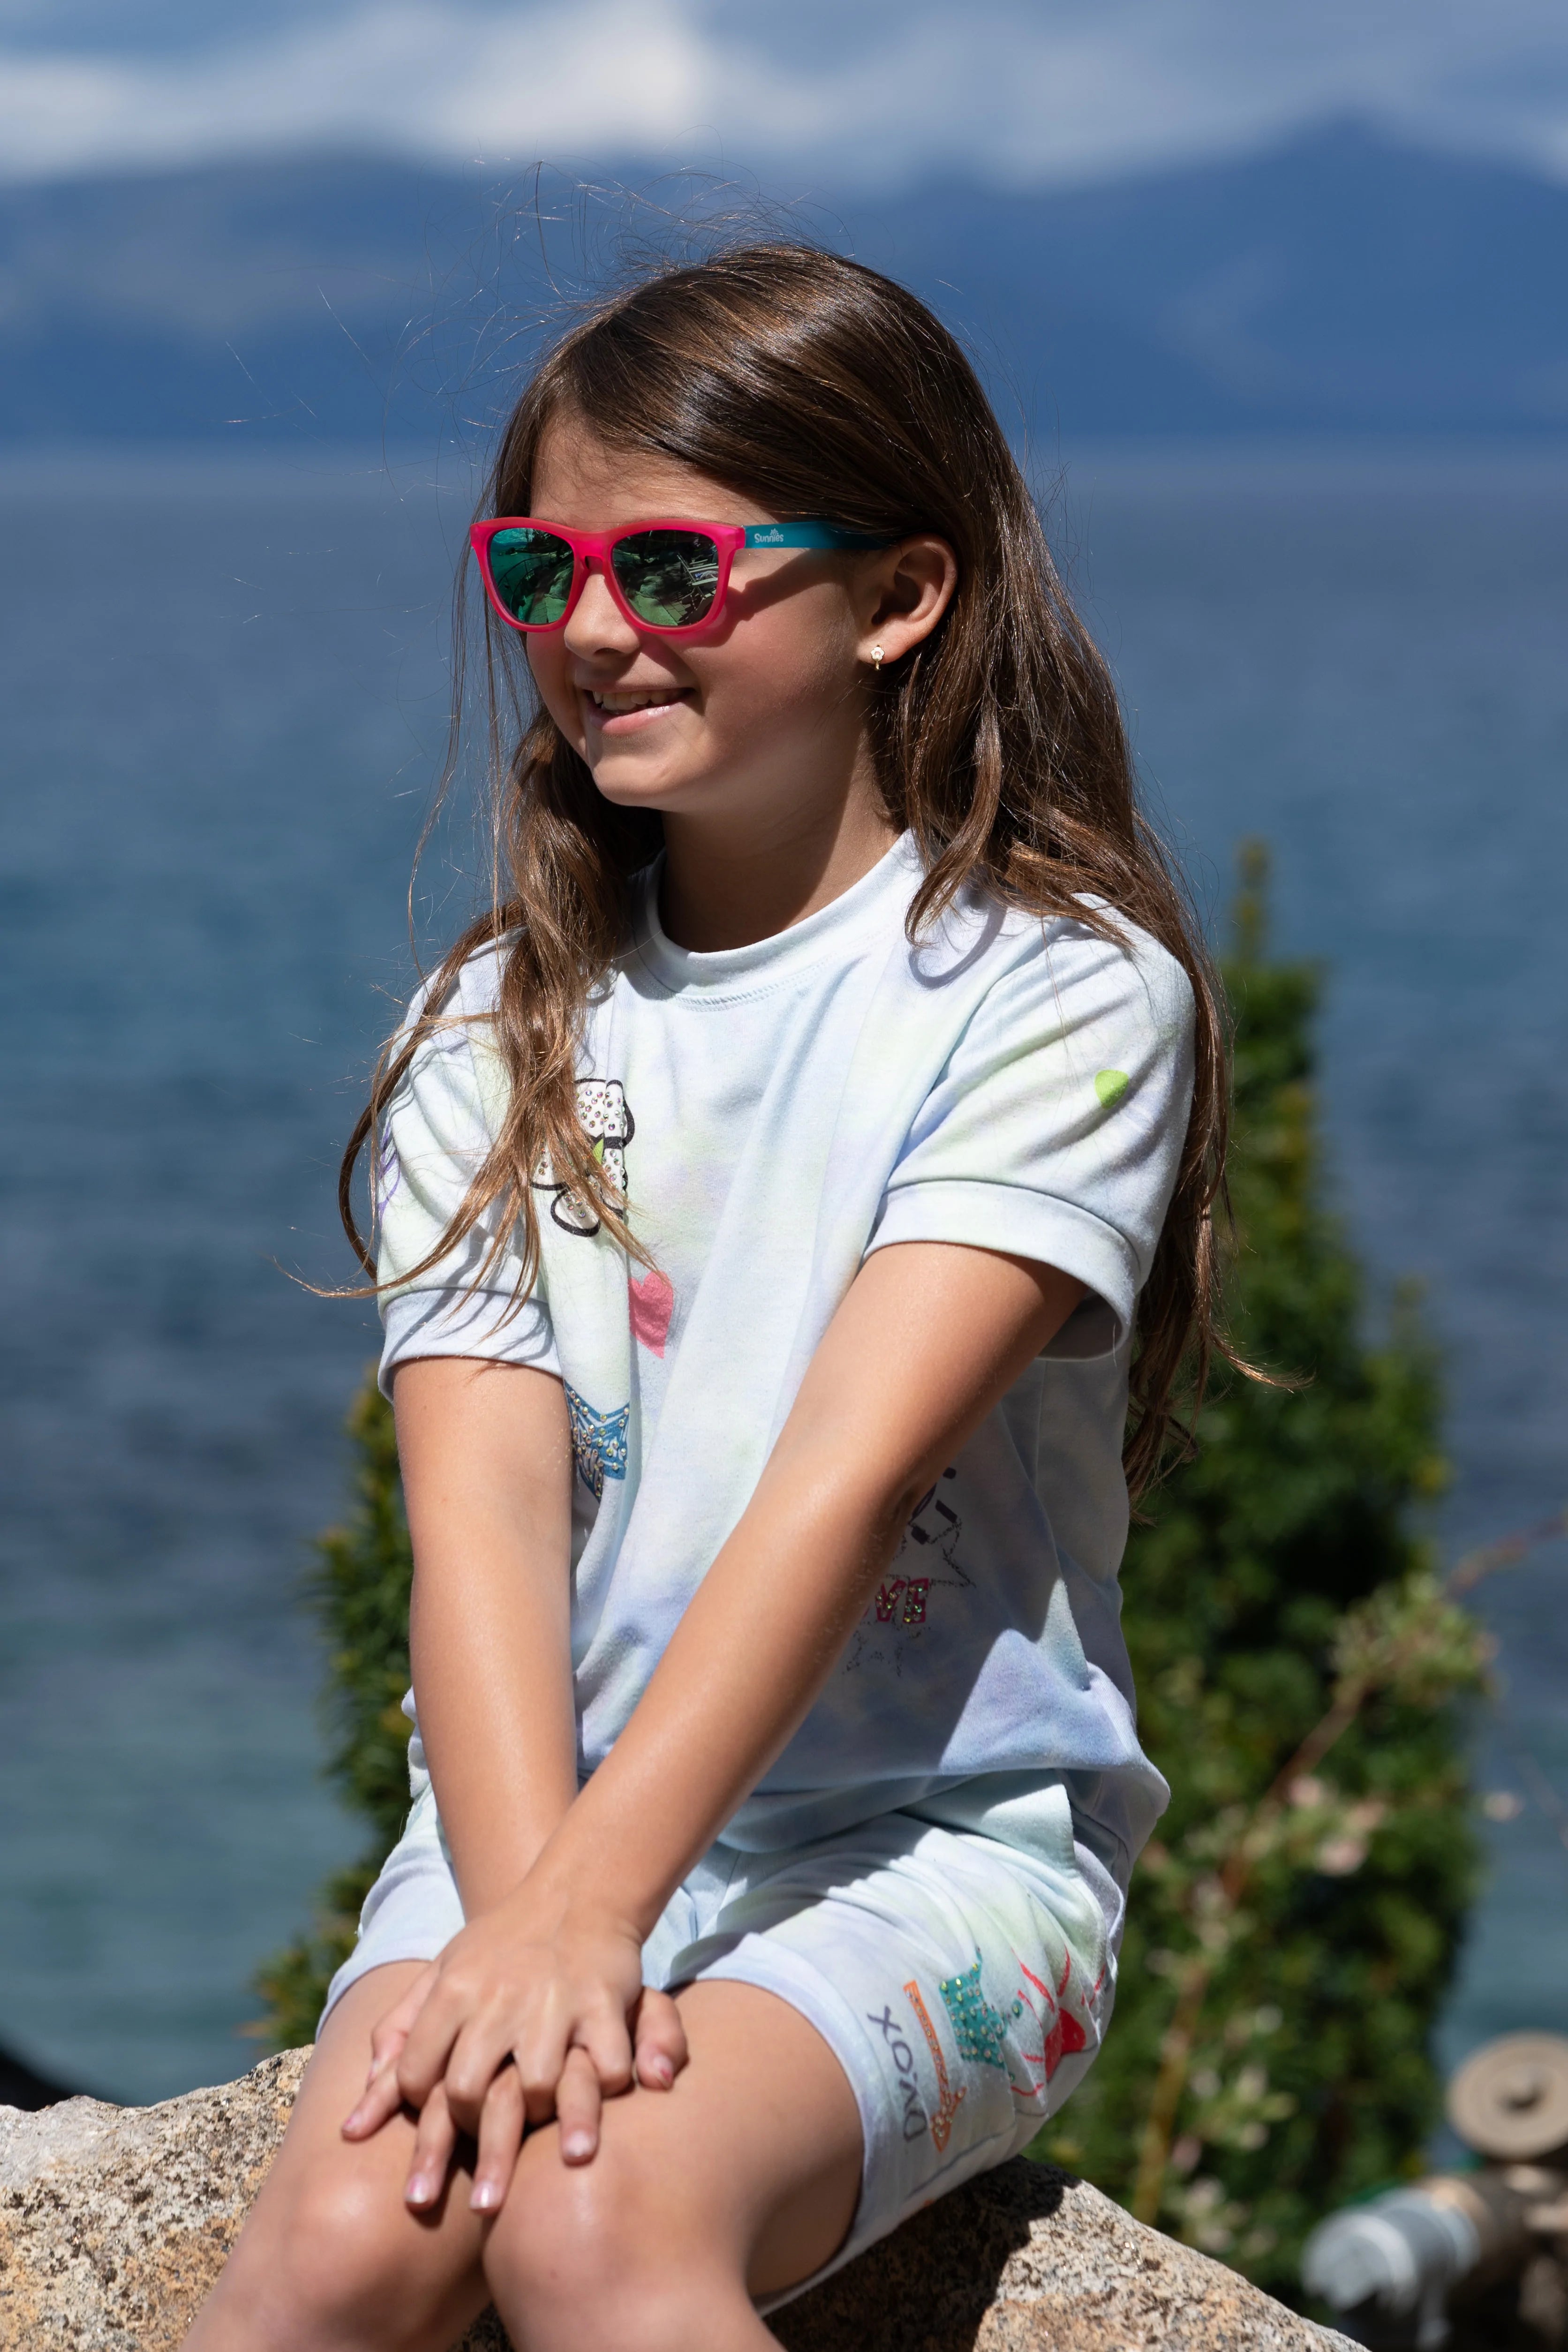 girl in sunglasses that are pink and turquoise sitting on a rock with a lake behind her